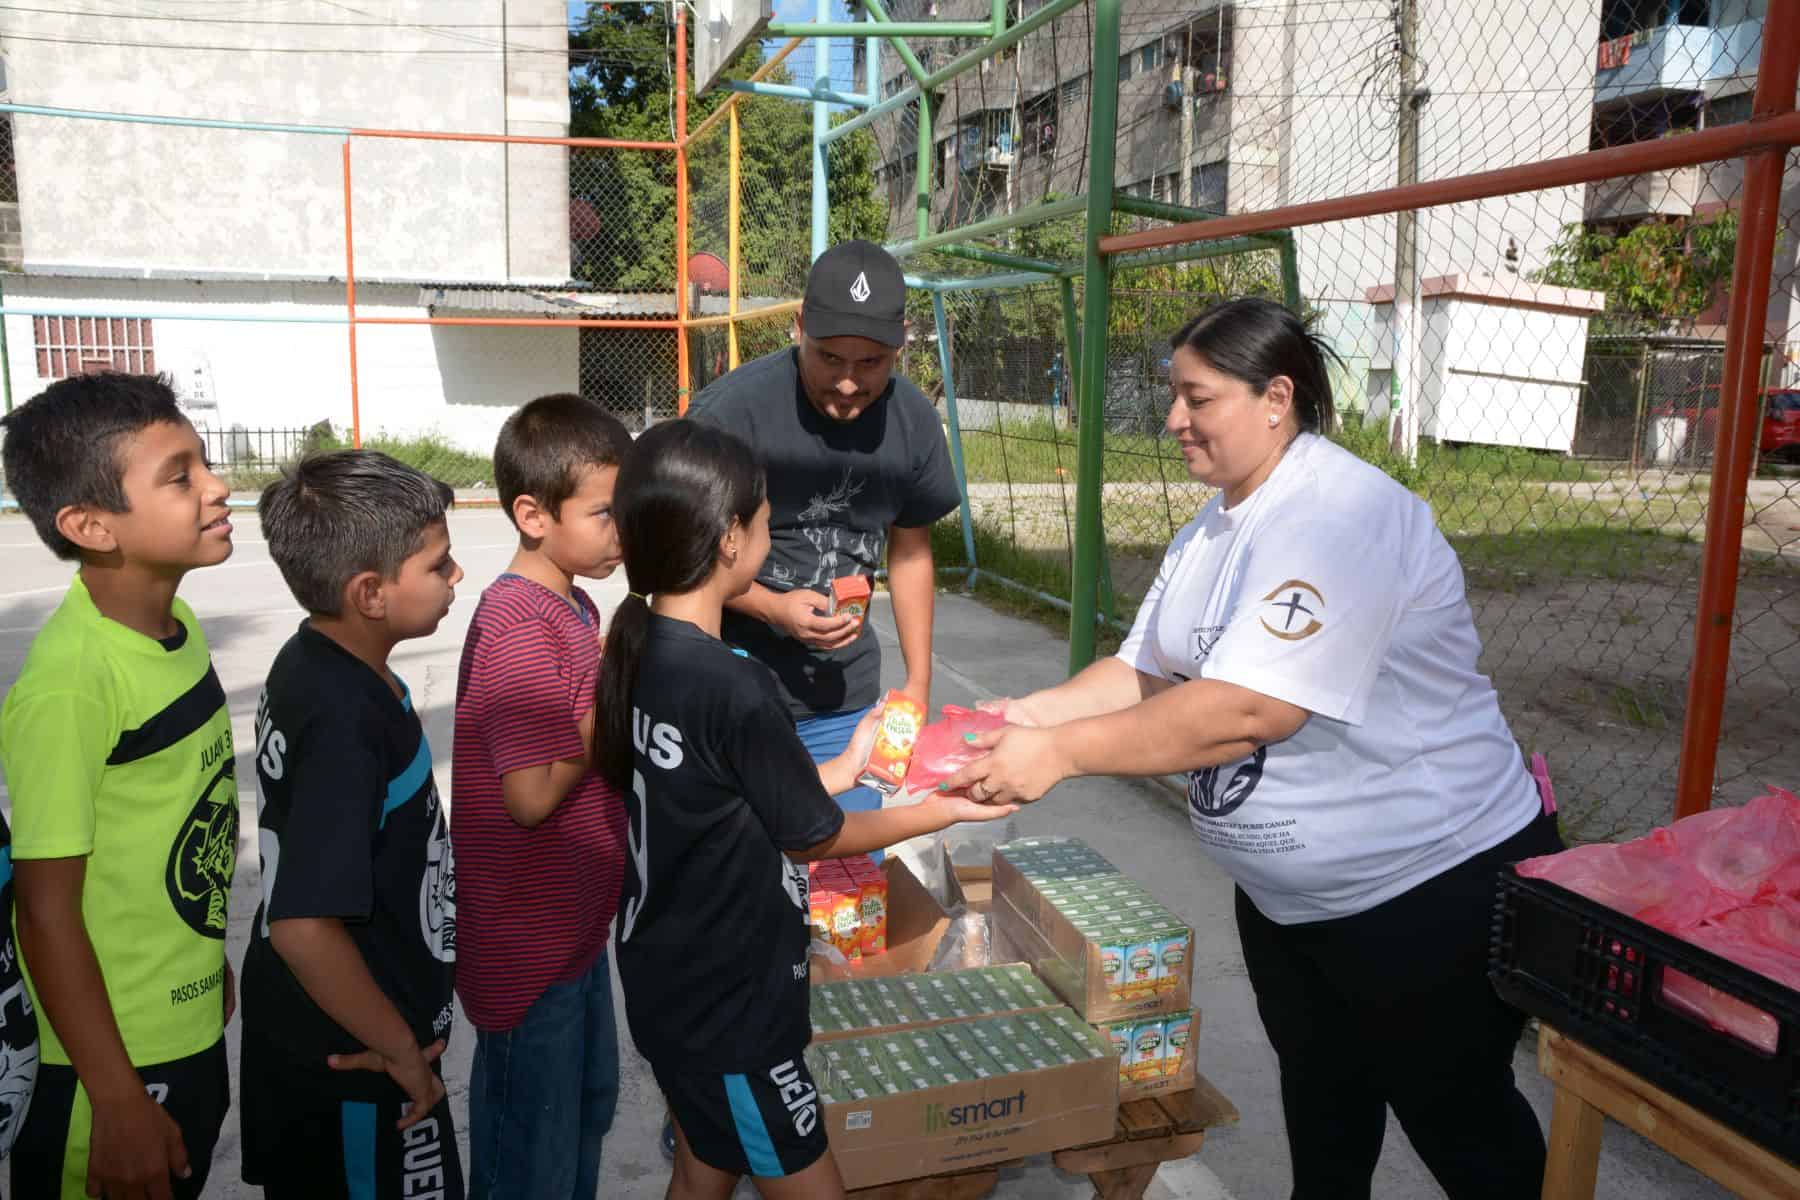 Canadian donations enable Samaritan’s Purse to provide snacks to these residents of a ghetto in El Salvador.